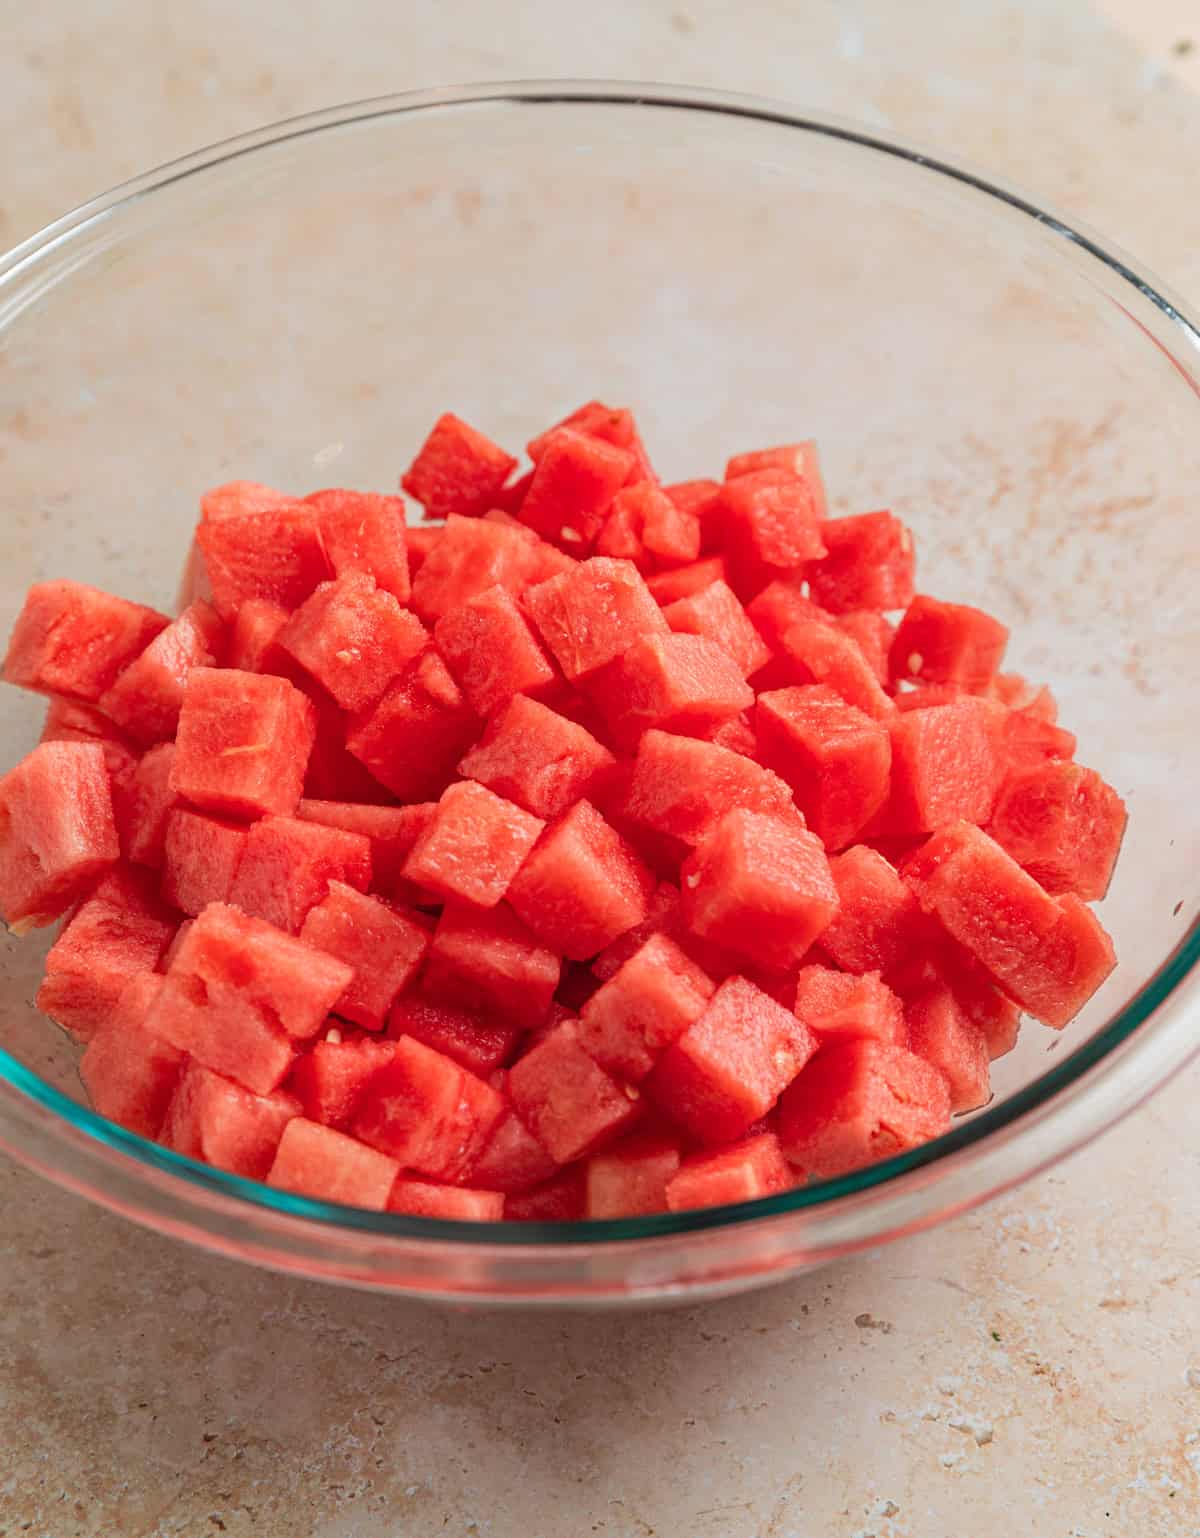 Cubed watermelon in glass bowl.